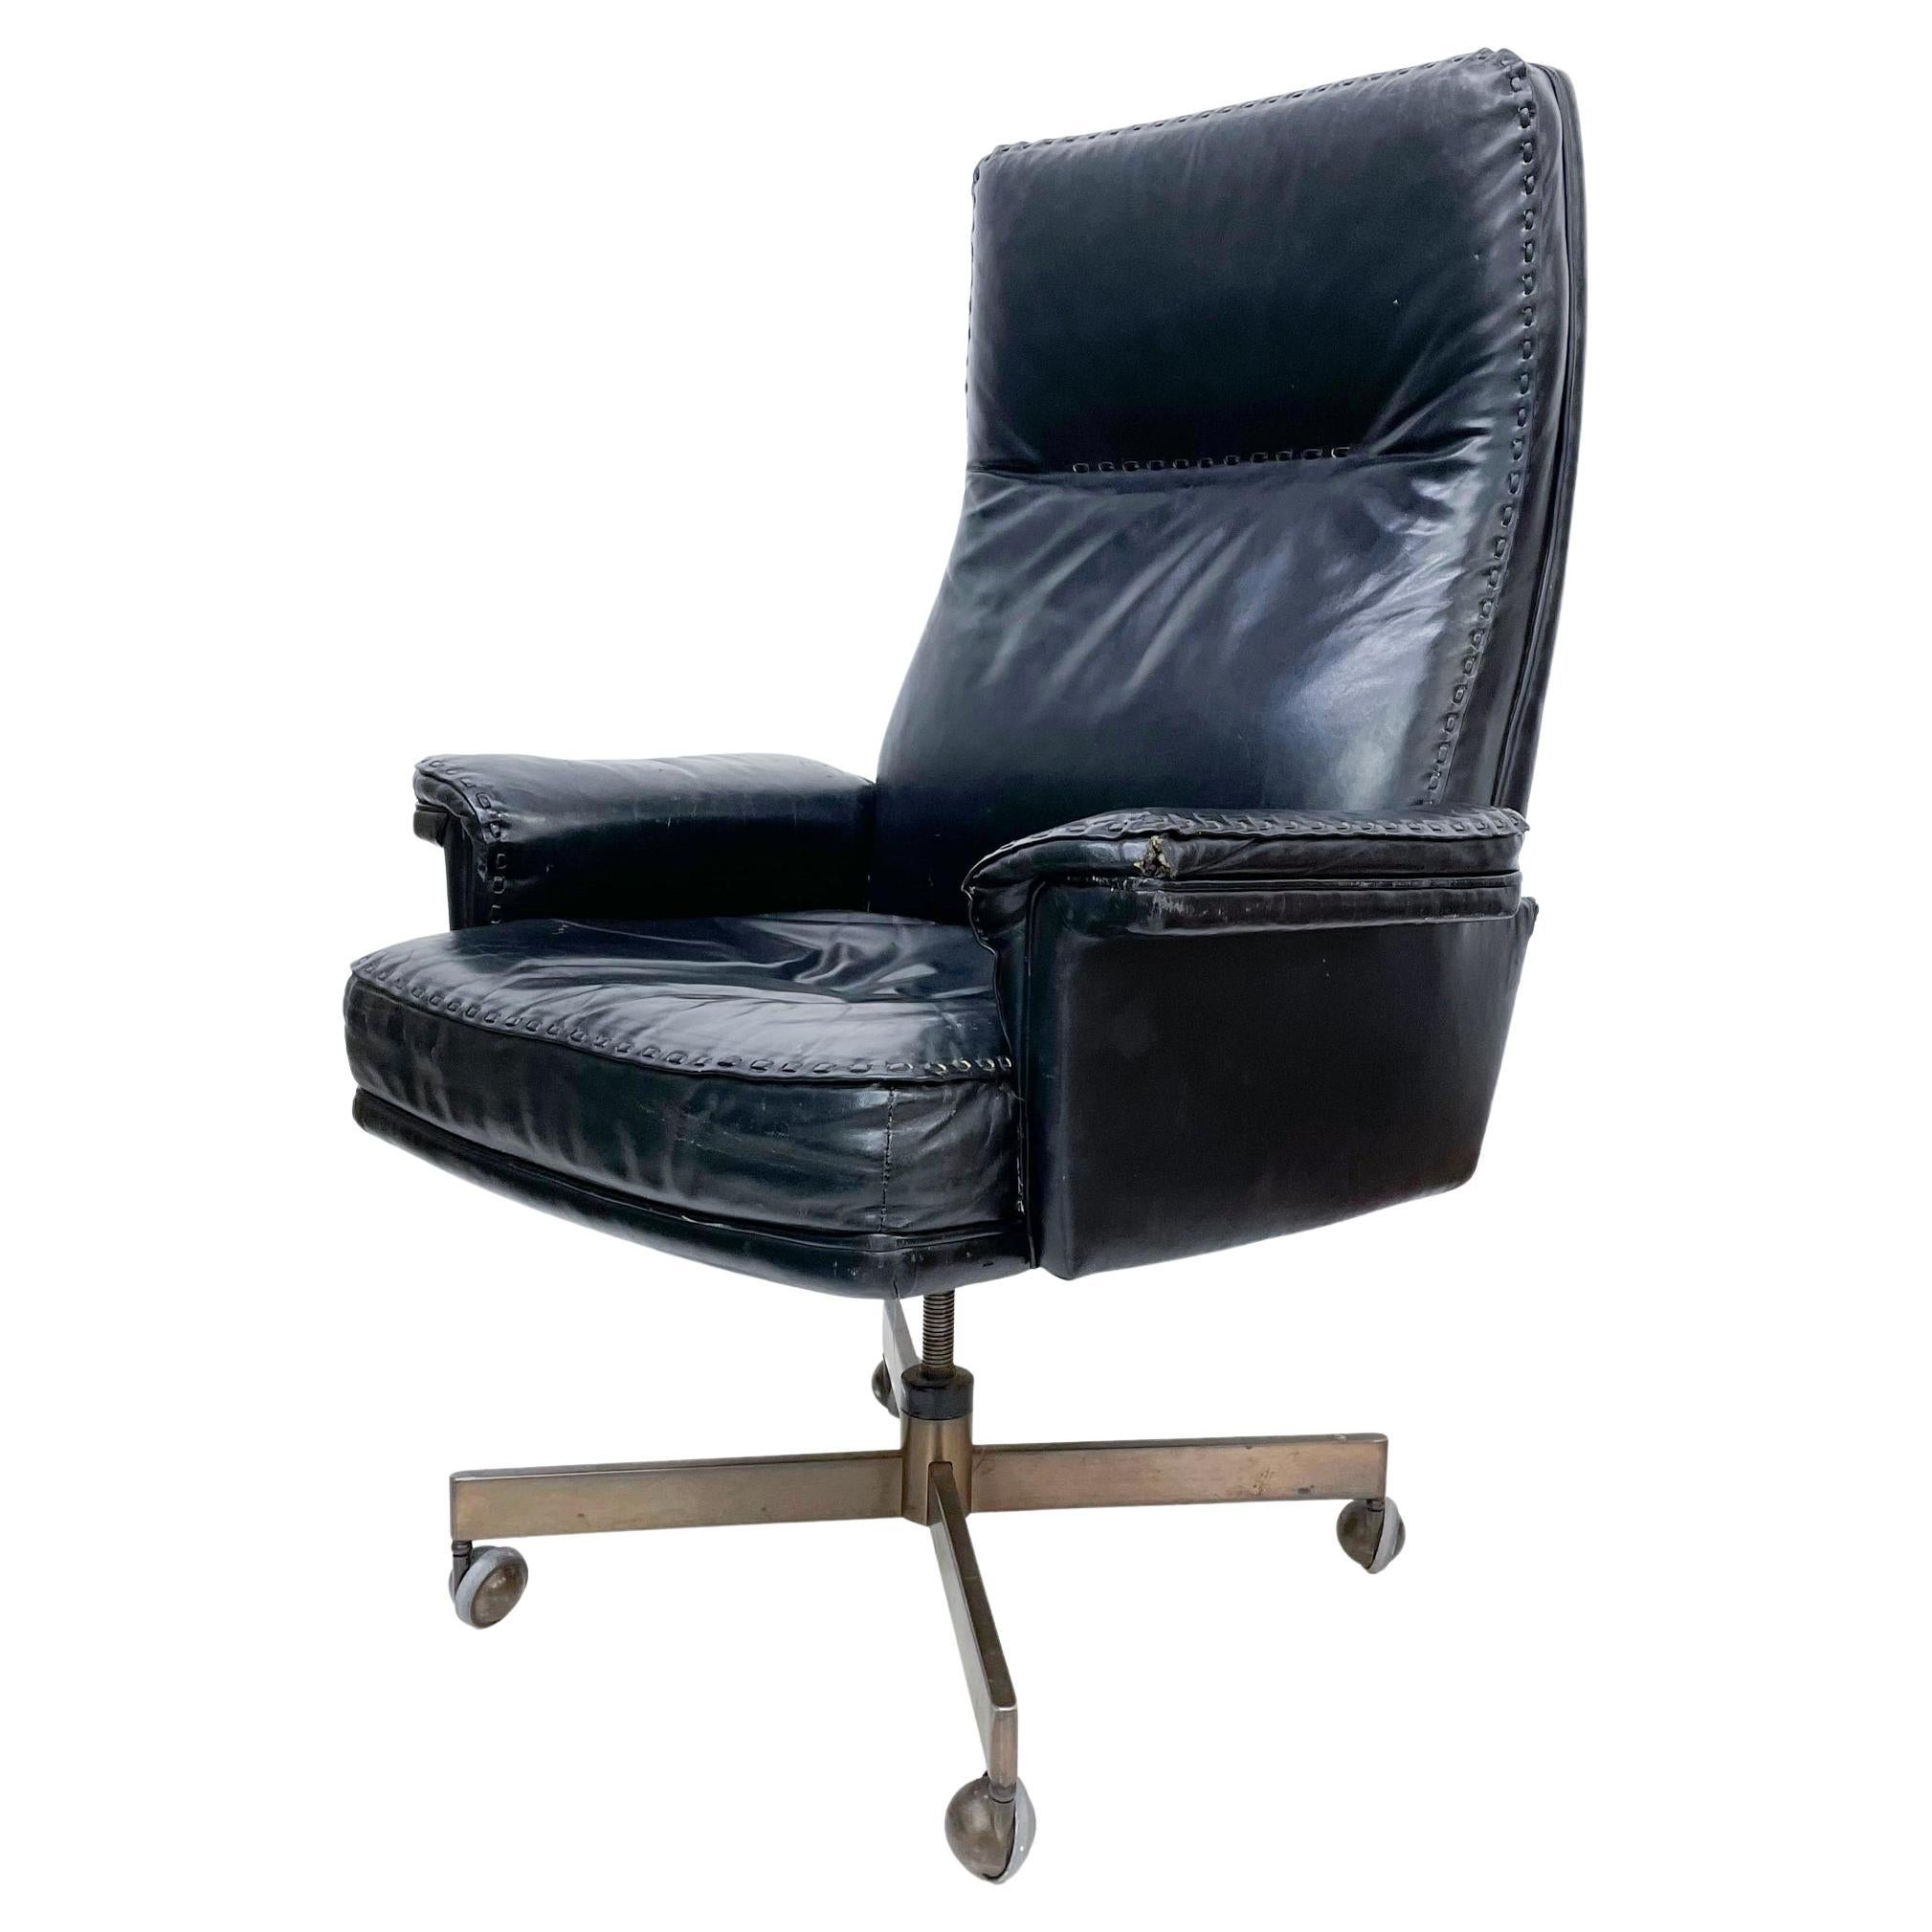 Executive Office Chair 1960s 
Sensational Black Leather Swivel Armchair Whipstitch style of De Sede DS 35
Maker stamped by Classic Leather Inc Hickory Hill, North Carolina
30 W x 46.5 H x 30 D, S 19.5 H adjustable, Arm rest 26 inches
Chair is in